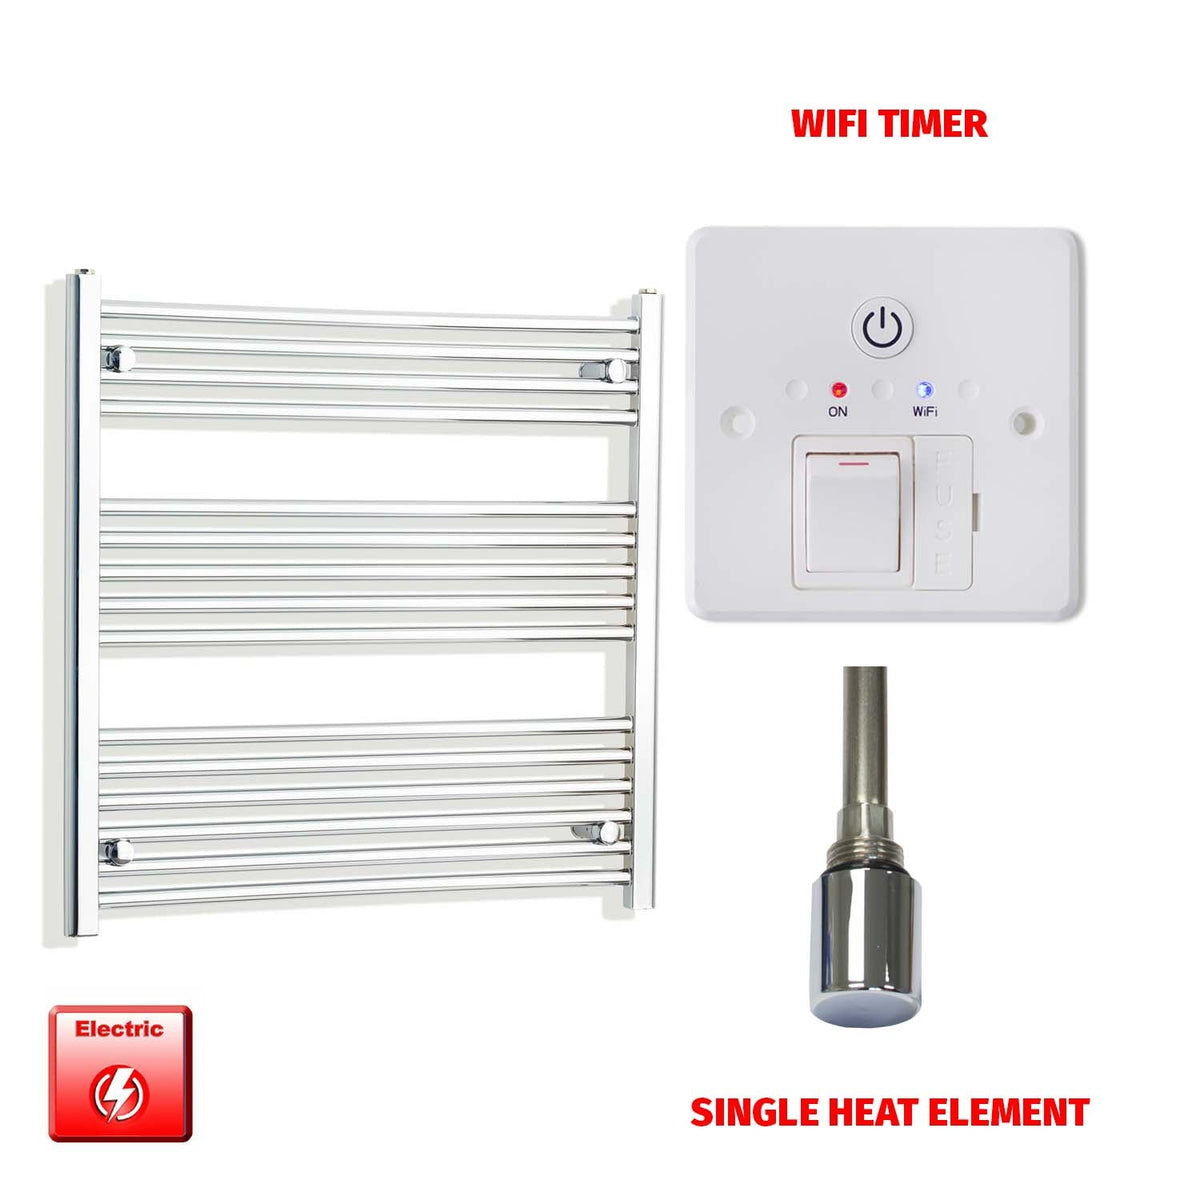 800 x 750 Pre-Filled Electric Heated Towel Radiator Curved or Straight Chrome Single heat element Wifi timer